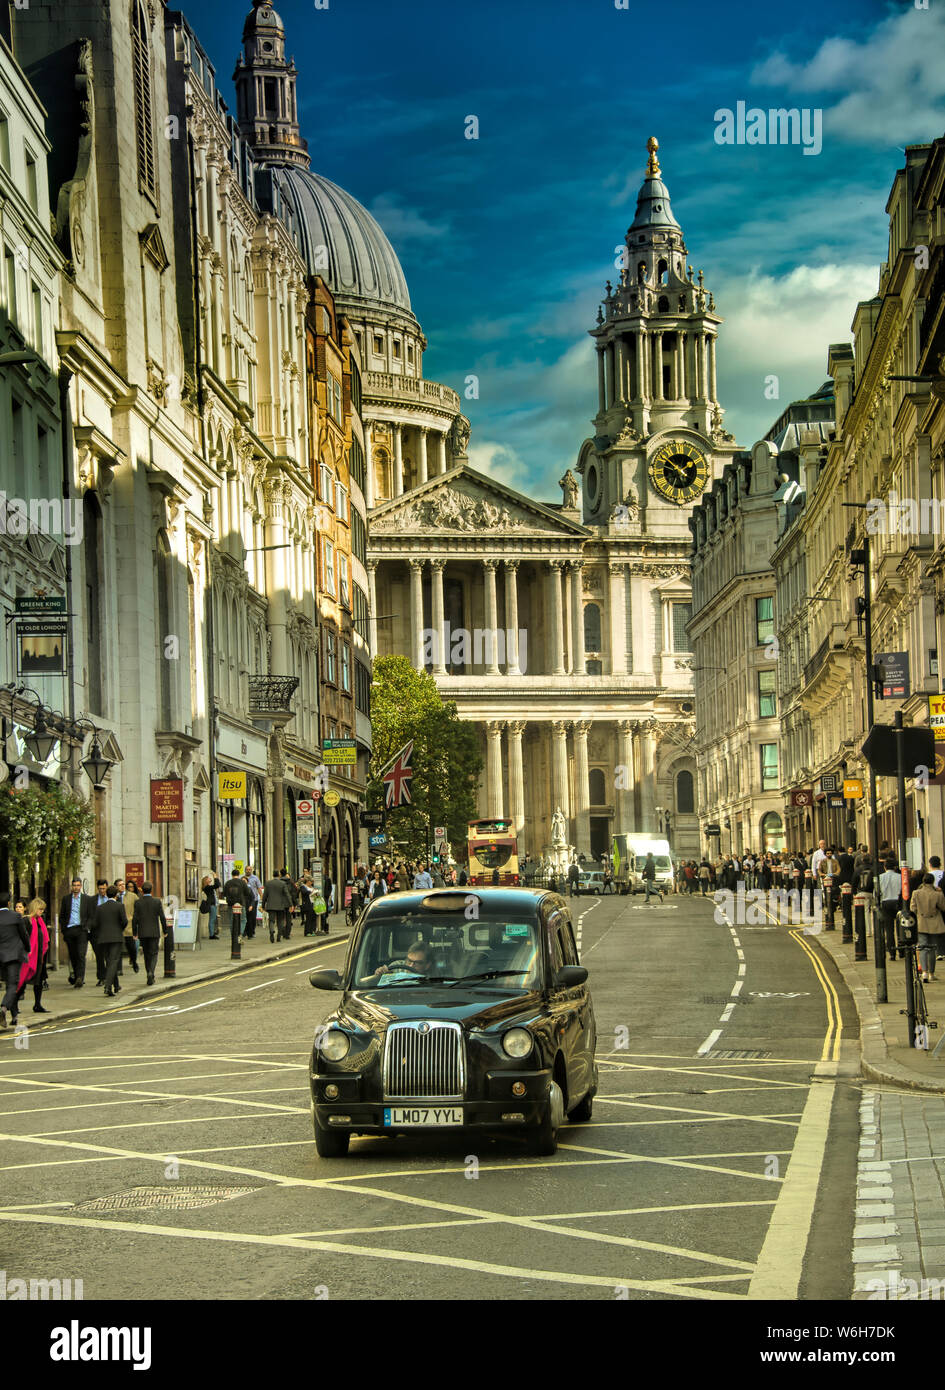 one of london iconic transportation, black taxi near st paul's cathedral during evening Stock Photo